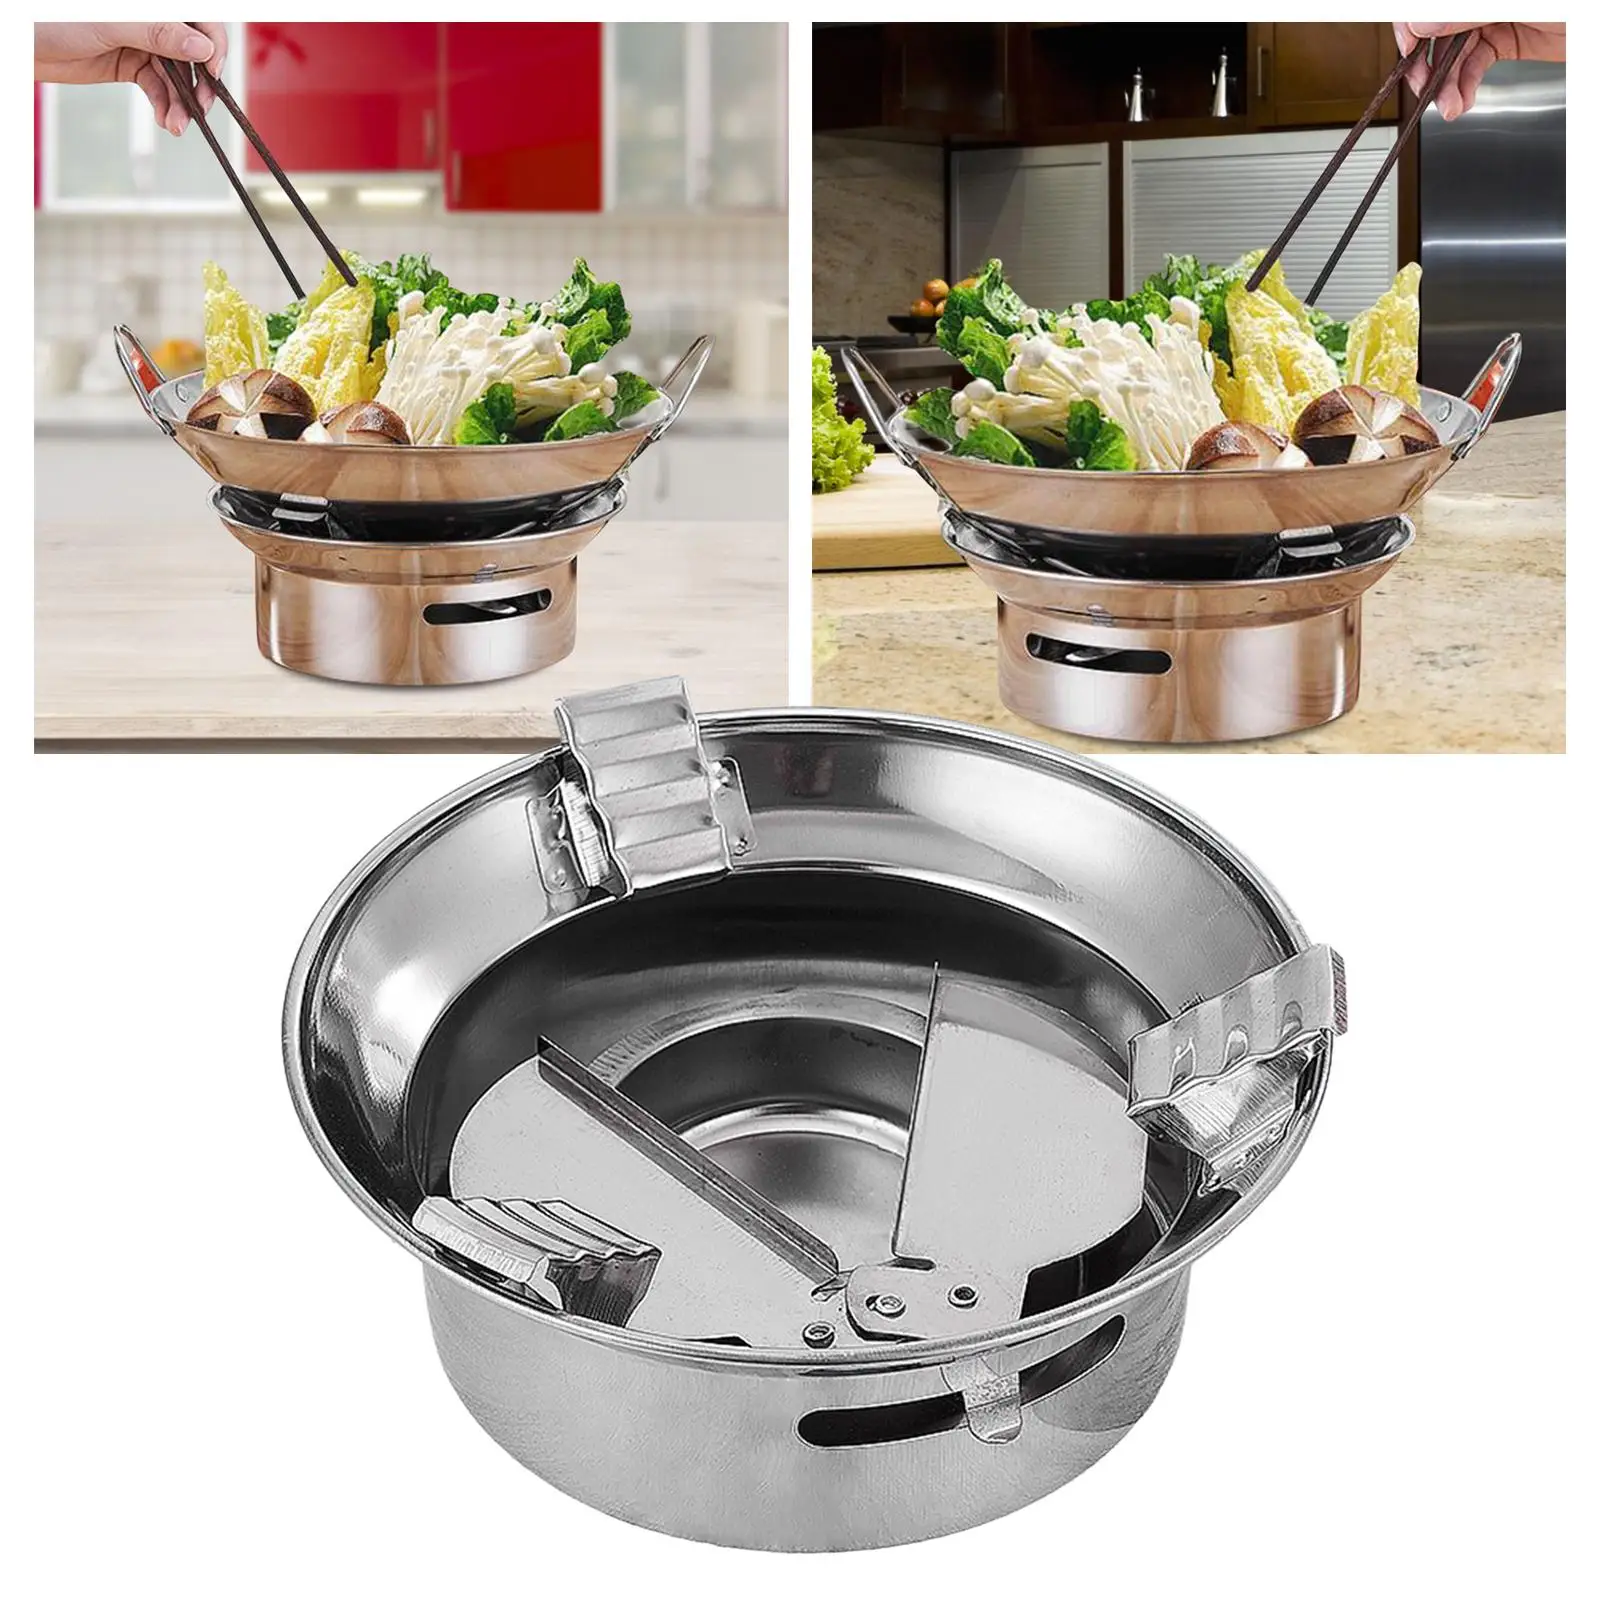 Round Portable Camping  Stainless Steel Lightweight Cookware Diameter 7.8inch Easily Adjust Fire Power Accessory Durable